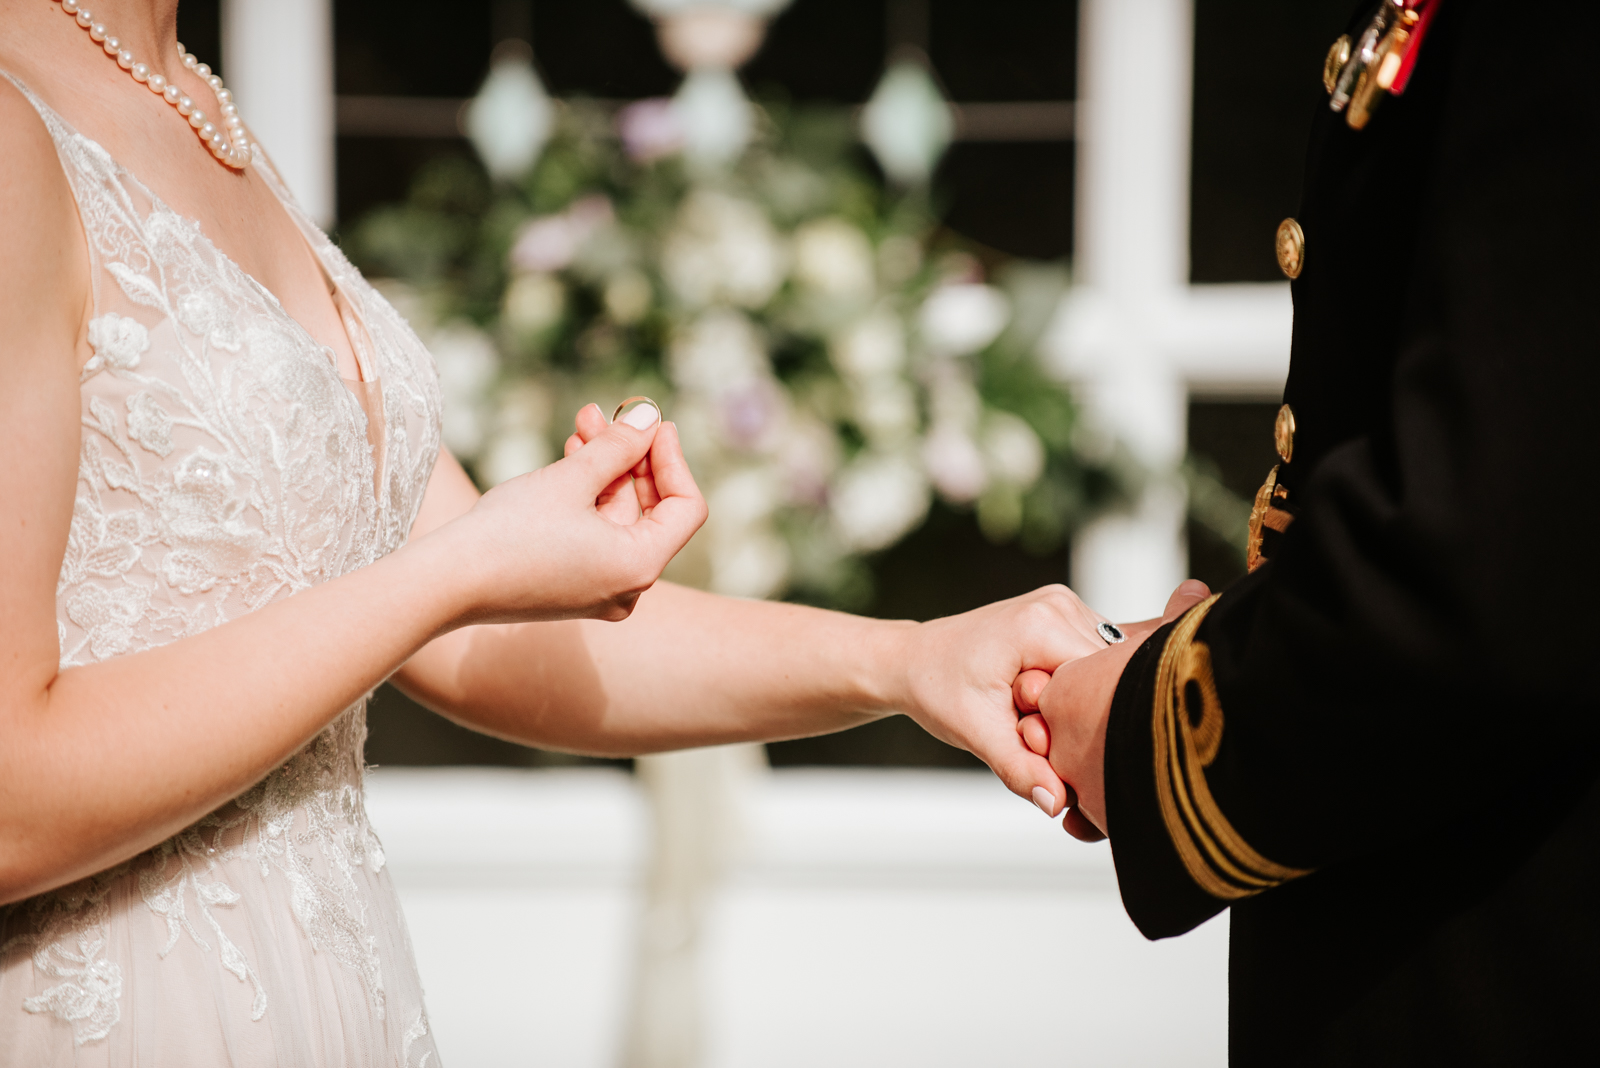 exchange of wedding rings during canadian navy wedding at private estate